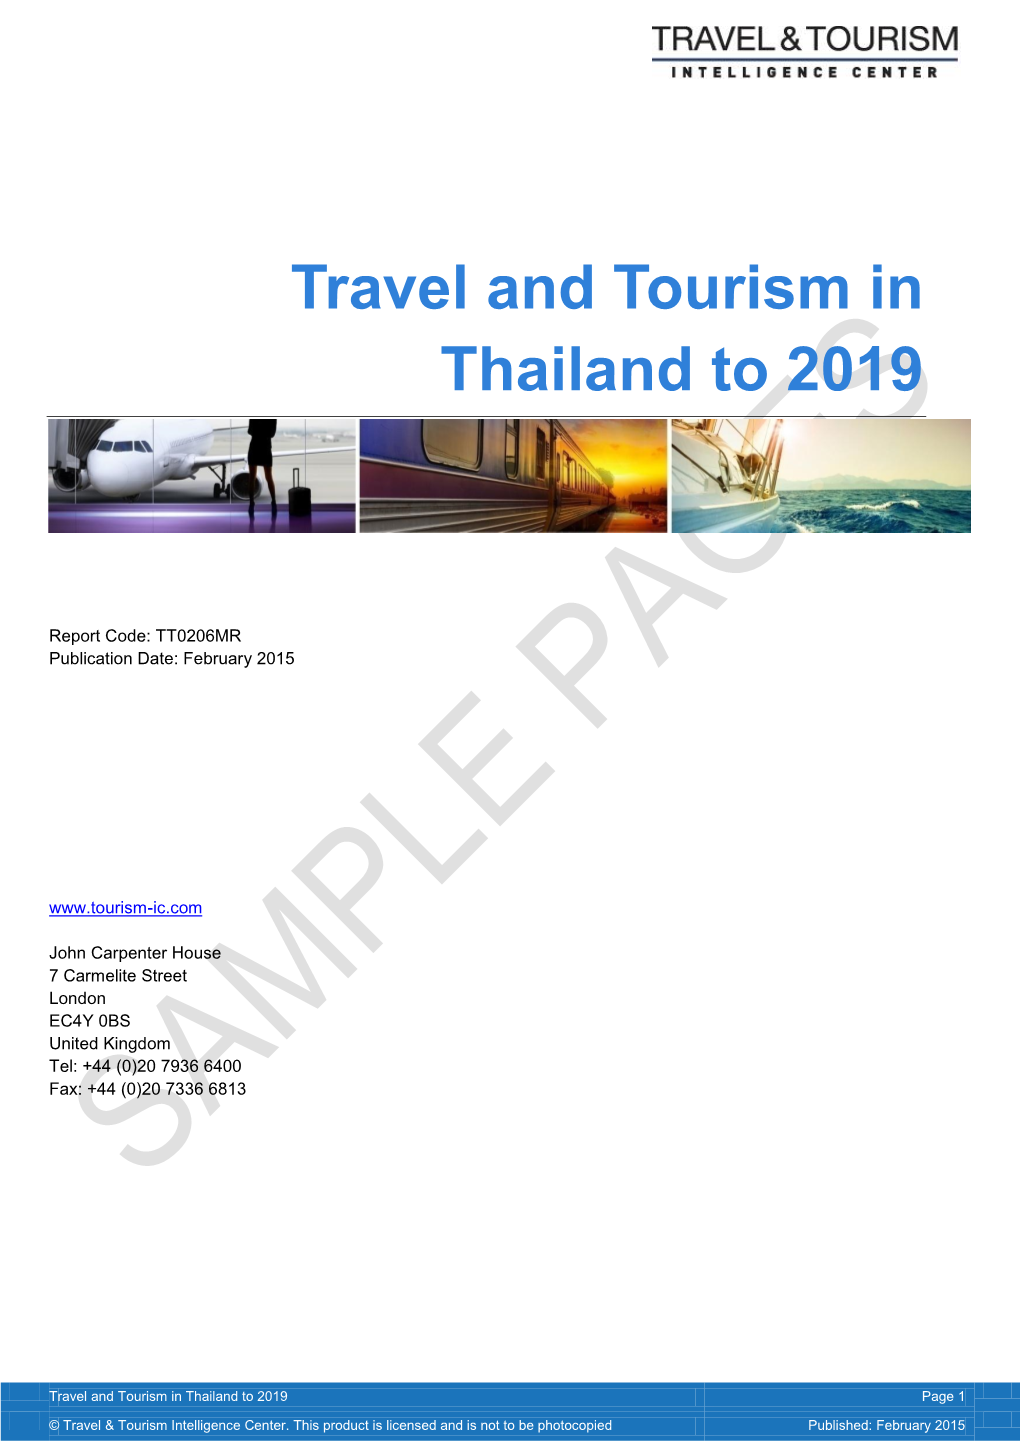 Travel and Tourism in Thailand to 2019